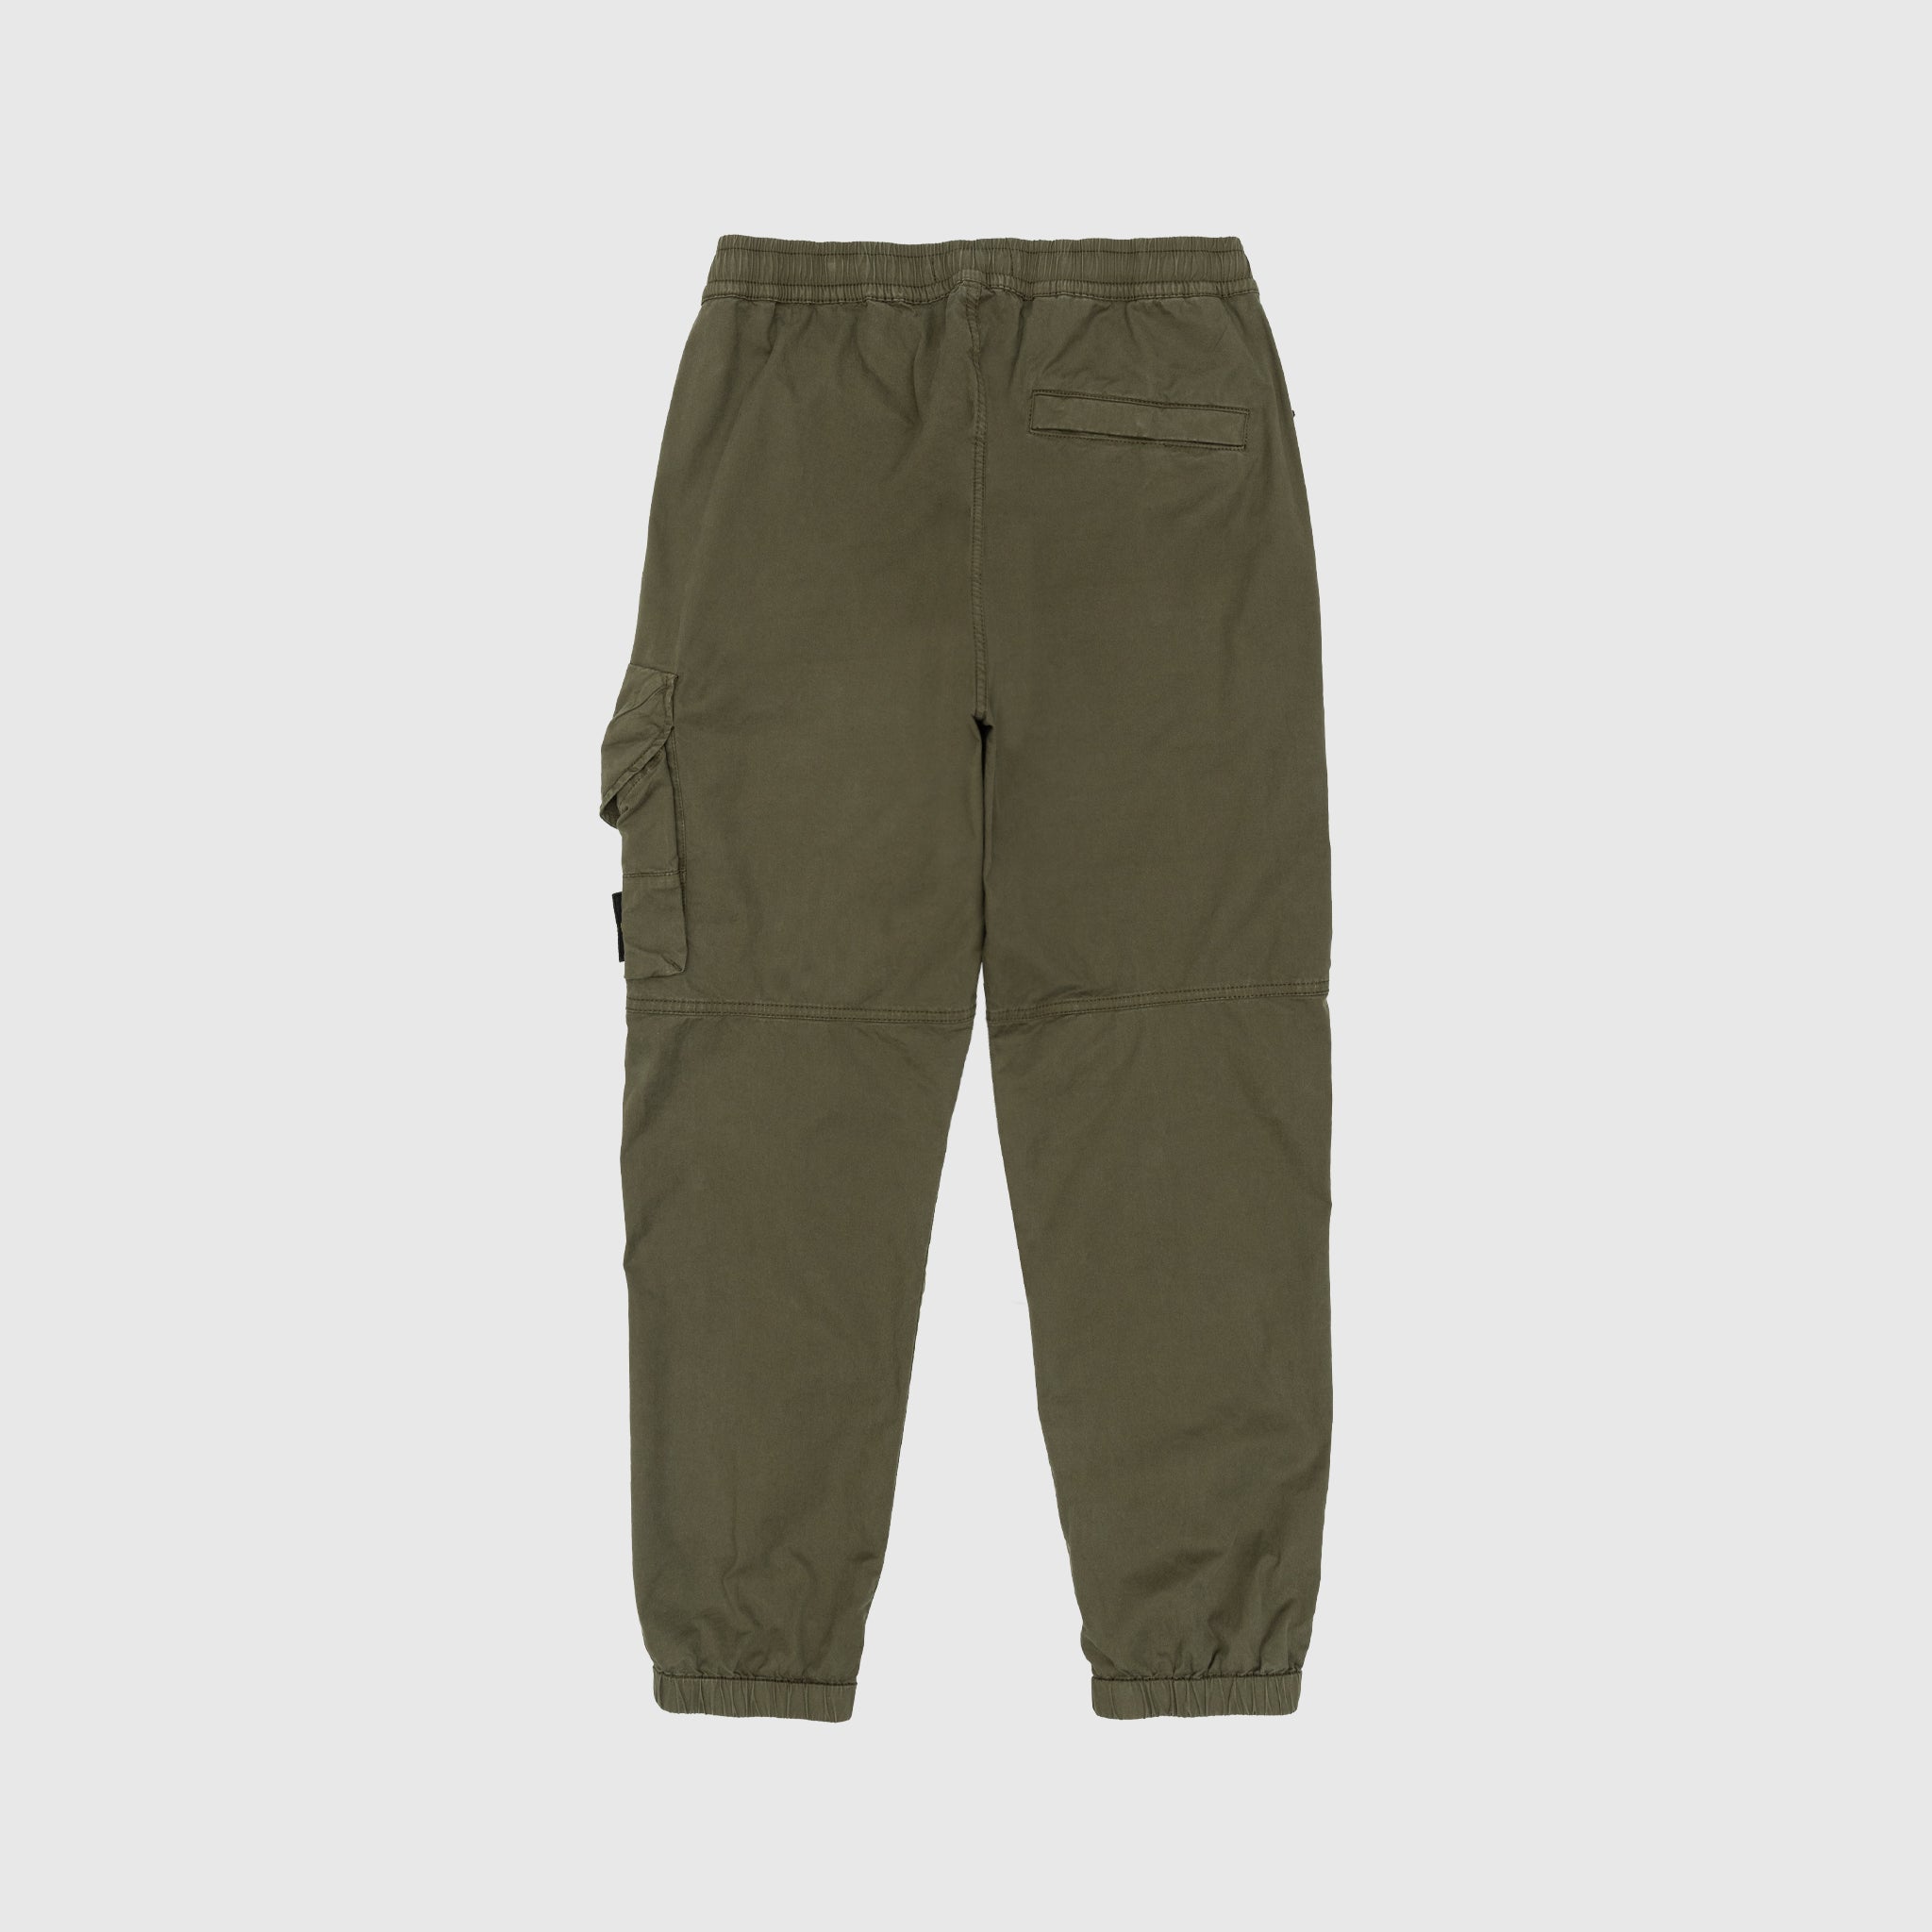 REGULAR TAPERED PANTS – PACKER SHOES